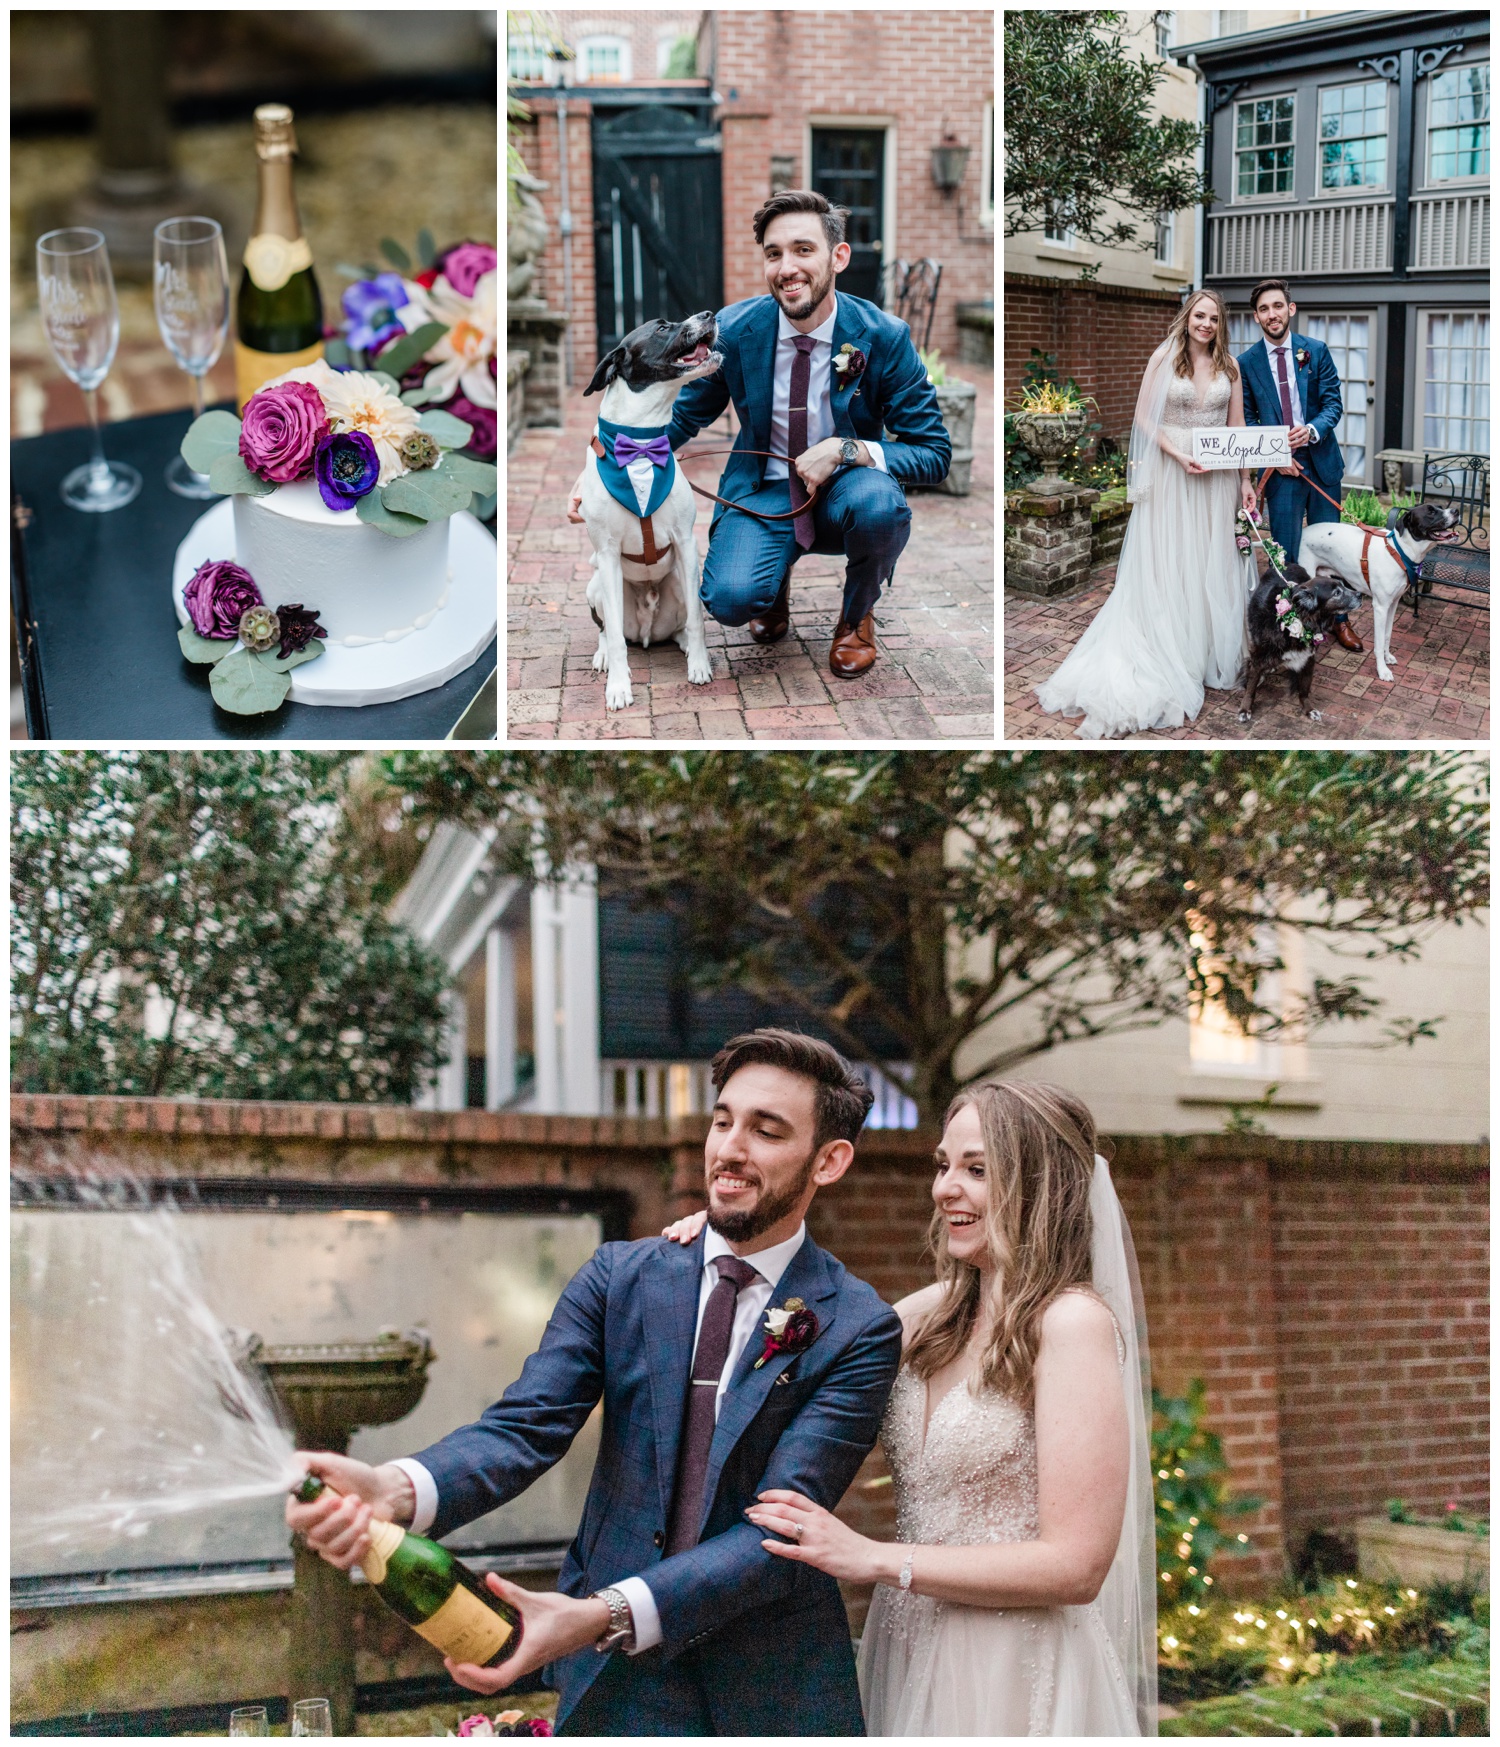 Private reception with the Savannah Elopement Package